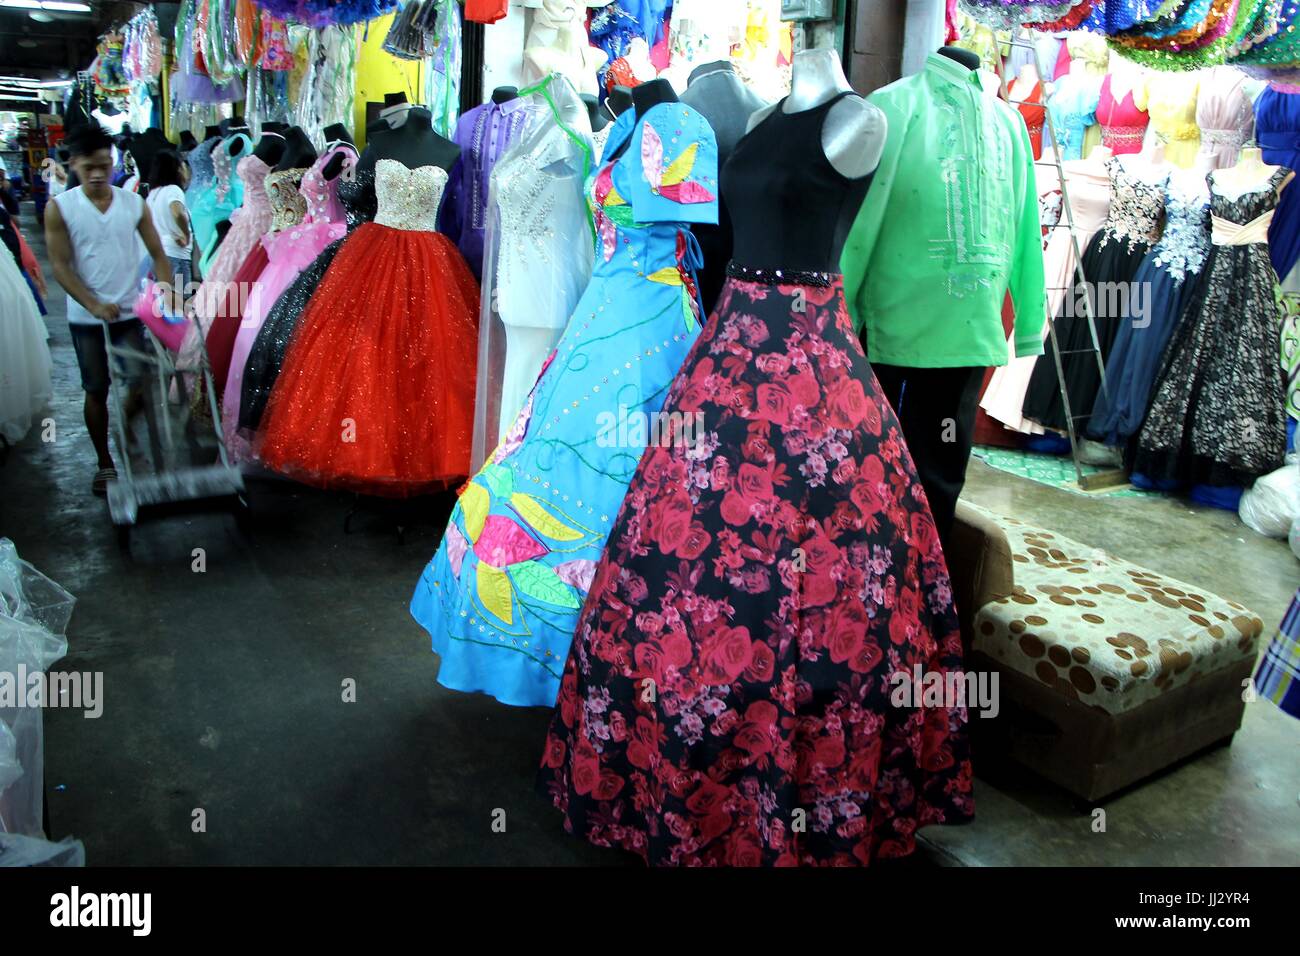 Philippines. 17th July, 2017. Various designed of dress and gown on display in different stores at Divisoria Market in Ylaya Street. Manila City on July 17, 2017. Divisoria Market is the heaven place for all dress designers where they bought all their materials for making dress at the cheapest price from US$ 0.50 pesos per yard of textiles depends on the kind of textiles. For budget conscious customers they can buy a readymade dress from 500.00 and wedding gowns that stars from US$ 30 per set. Credit: Gregorio B. Dantes Jr./Pacific Press/Alamy Live News Stock Photo